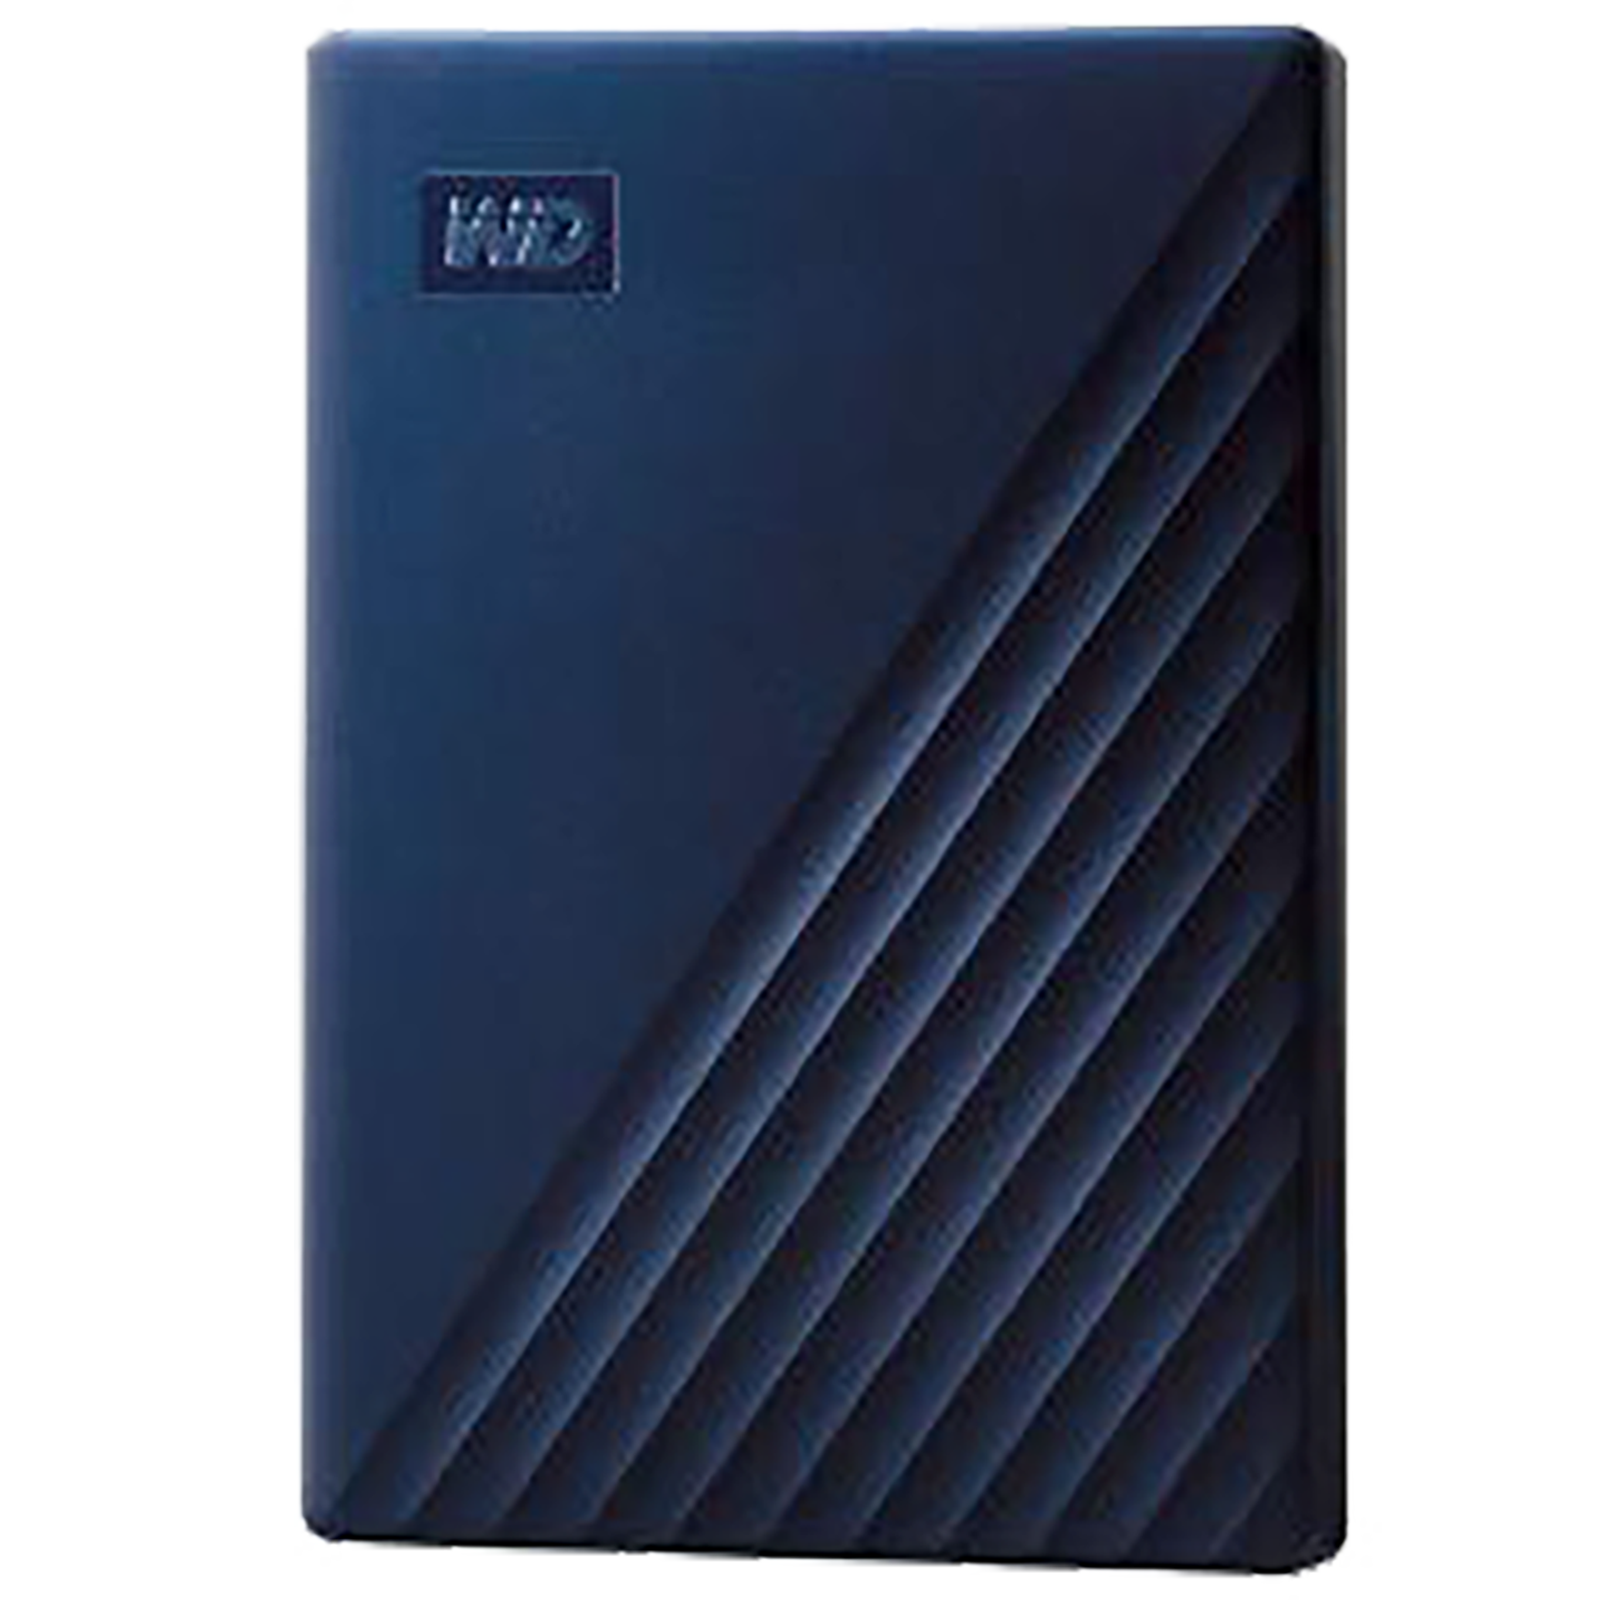 Western Digital My Passport For Mac 2 TB USB 2.0/3.0 Hard Disk Drive (Password Protection, WDBA2D0020BBL-WESN, Blue)